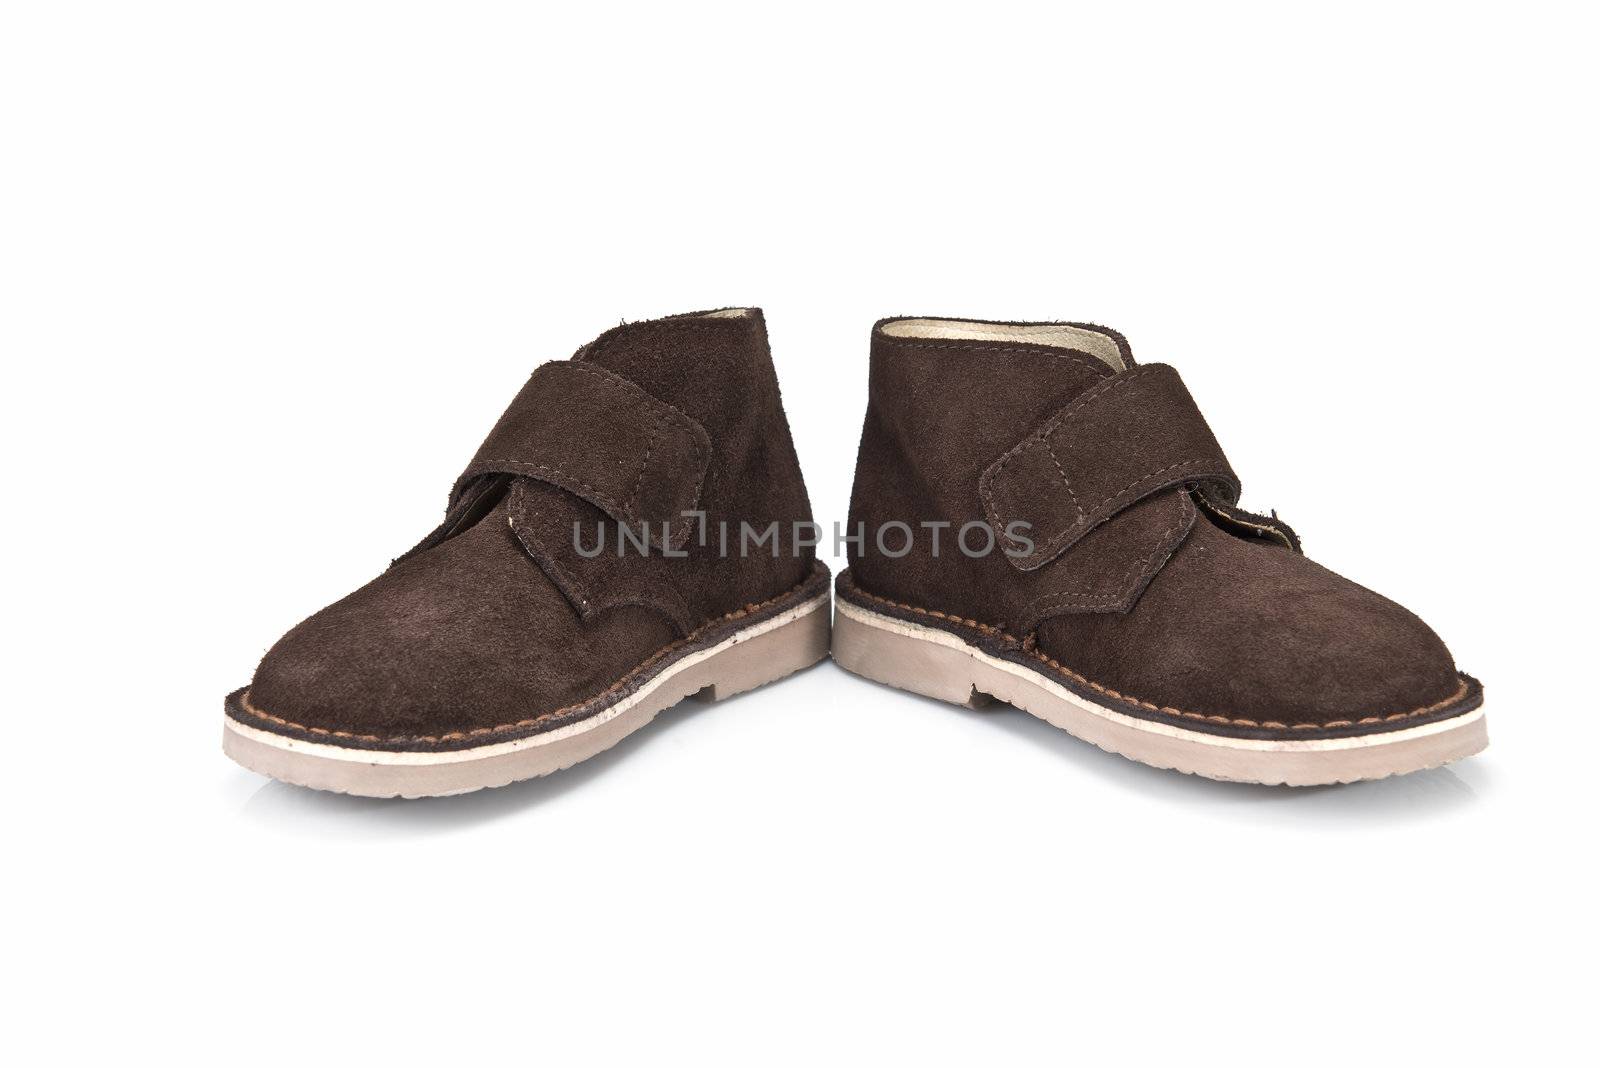 Brown leather boots for kids isolated on a white background.